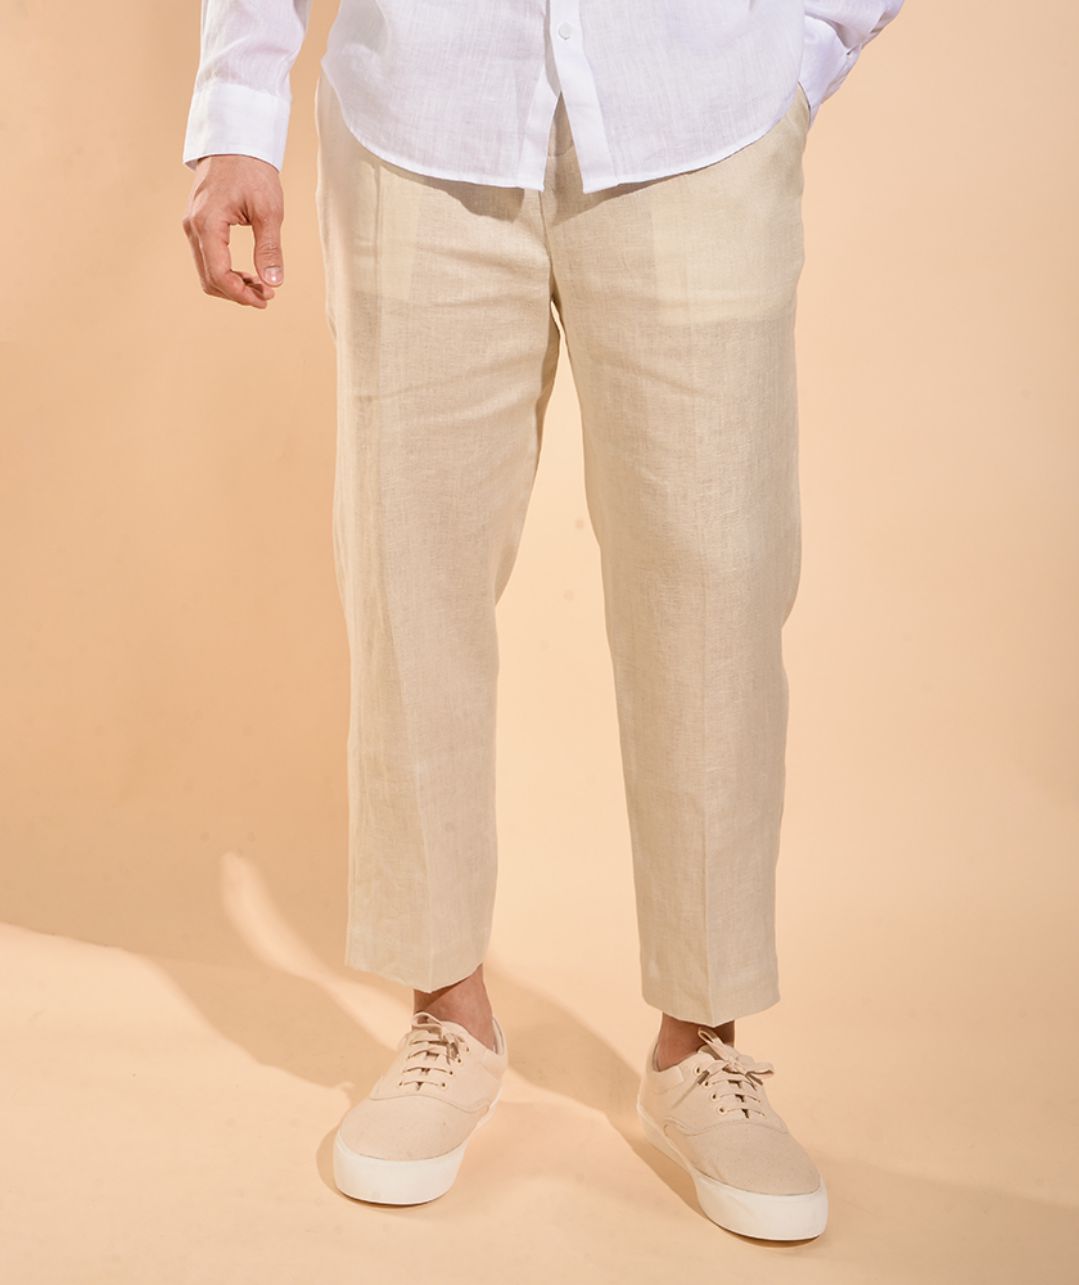 Buy Khaki Drawcod Linen Relaxed Fit Men's Trousers-North Republic